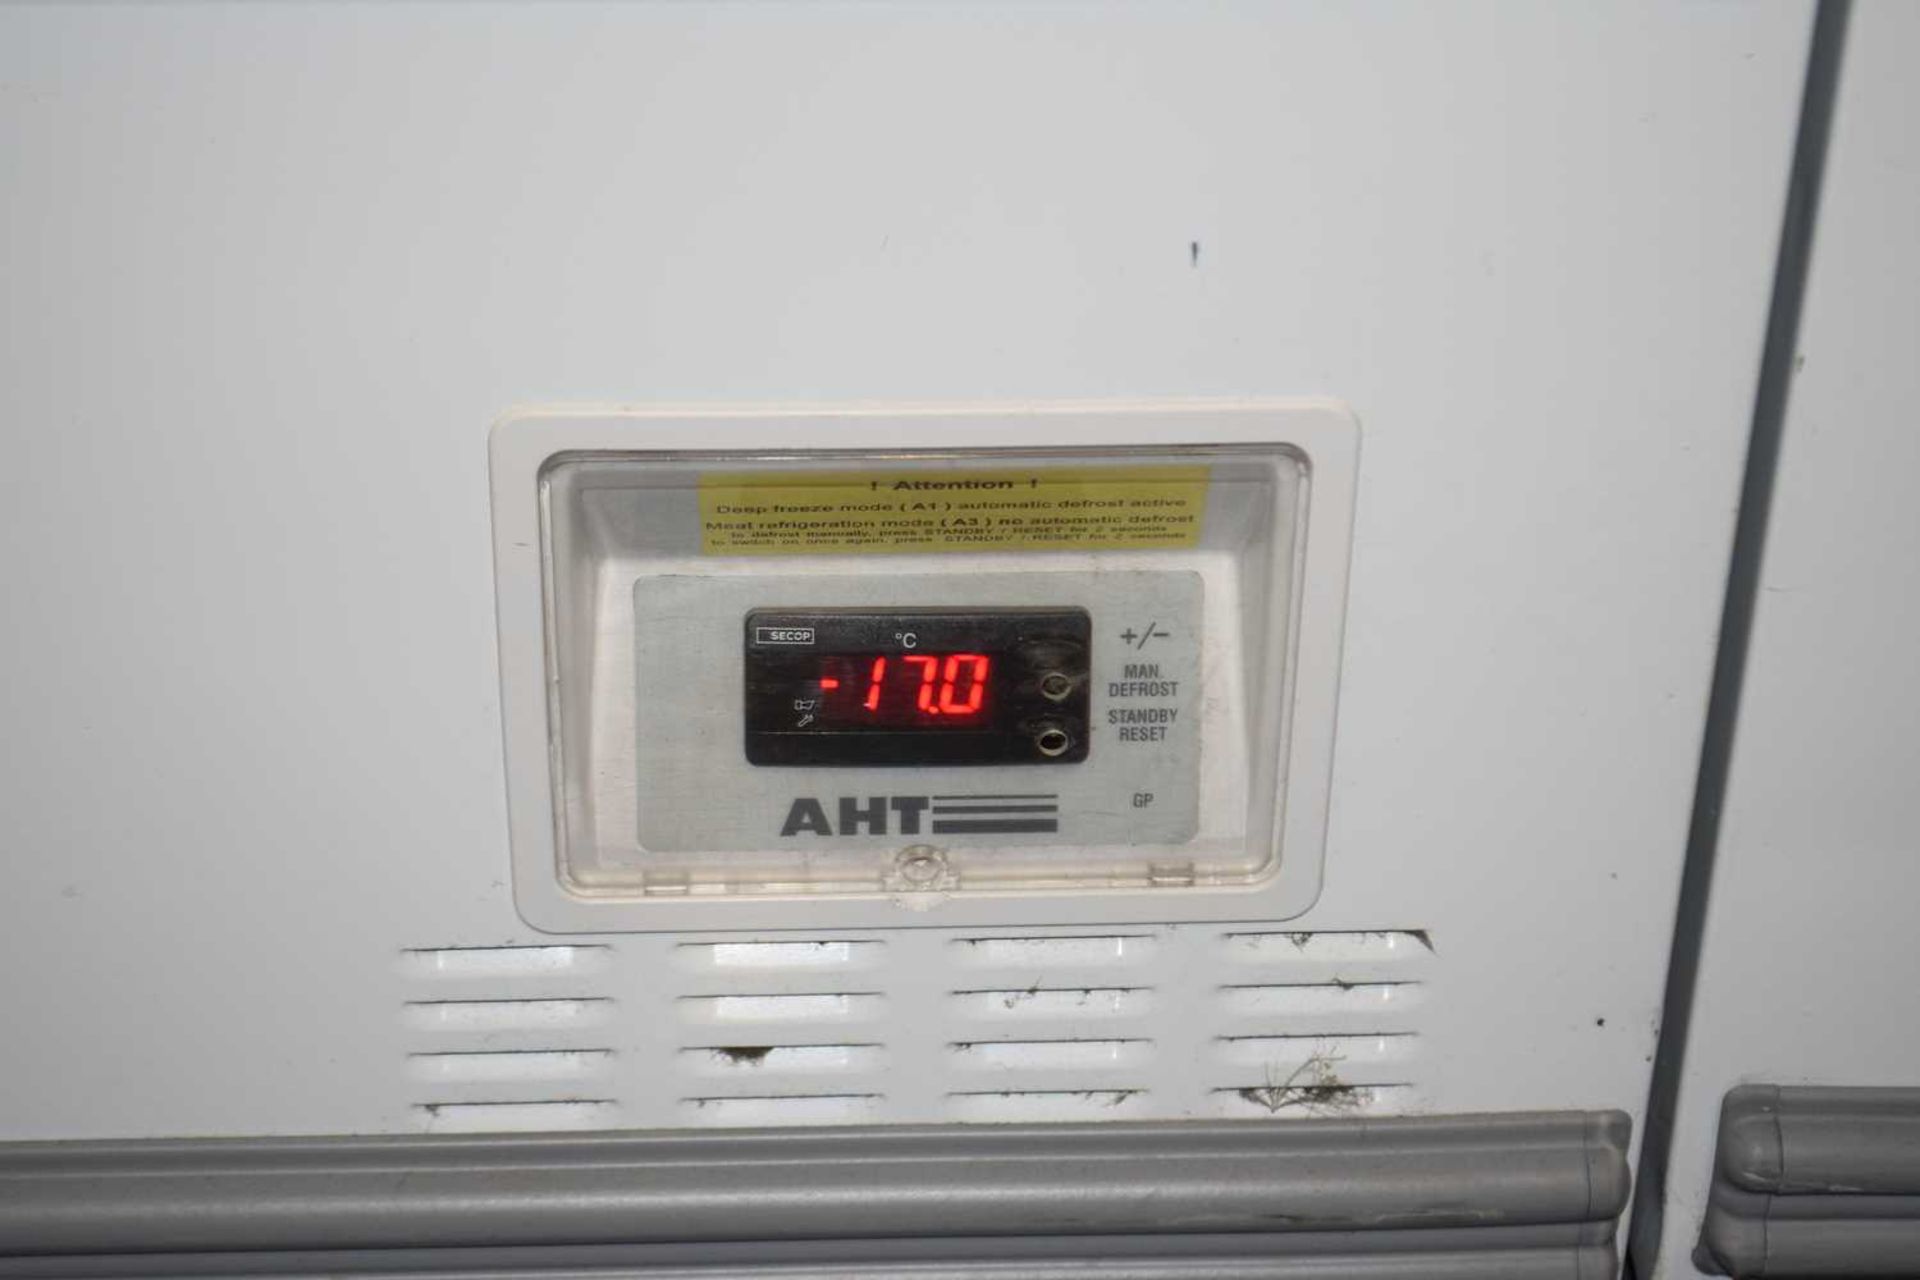 AHT 2.5 metre commercial display freezer Model: Miami 250L, in working condition (including - Image 3 of 3